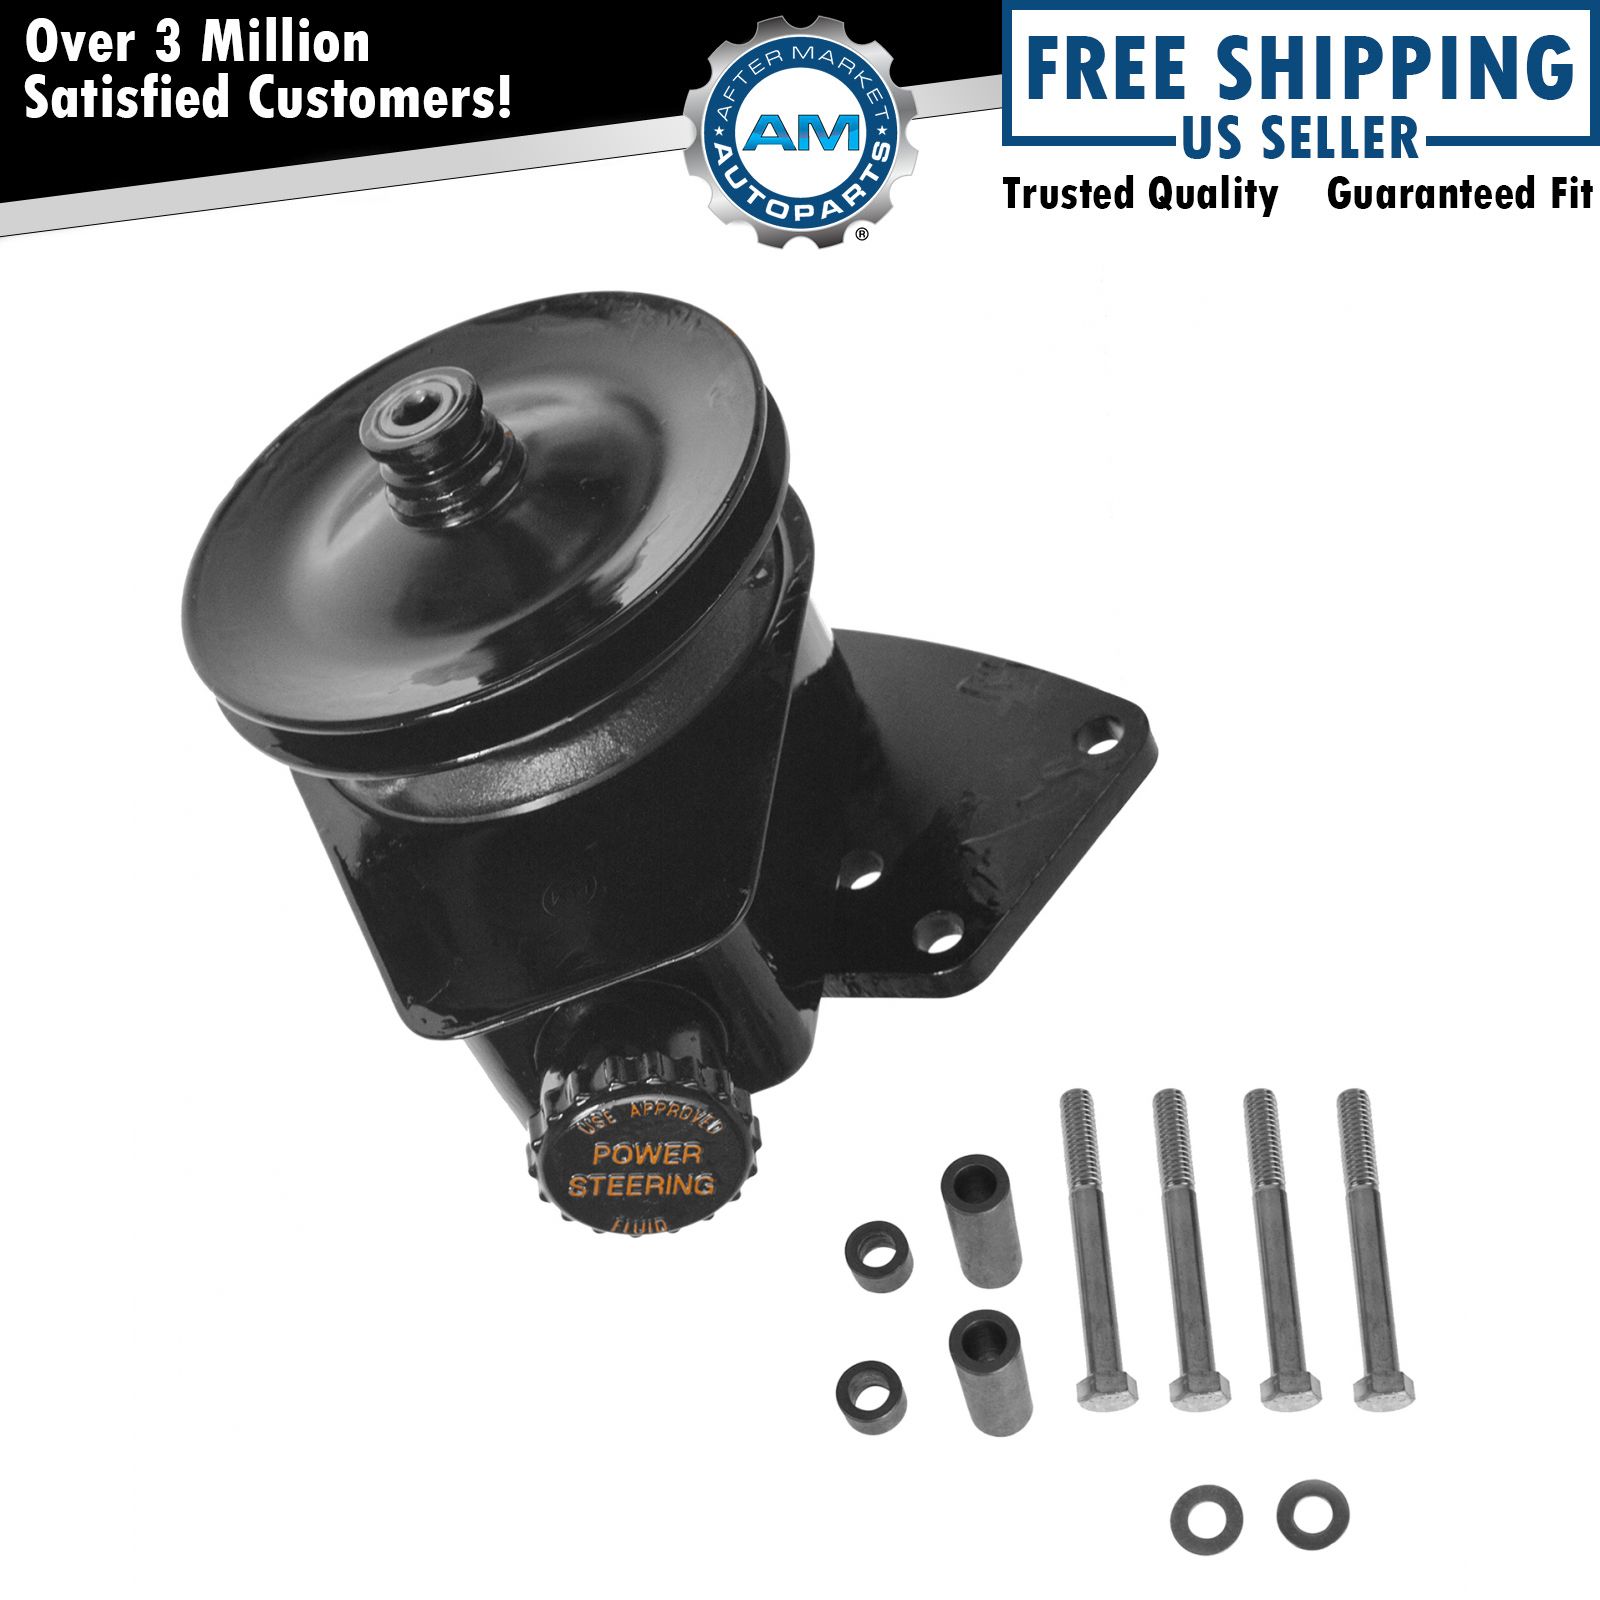 BORGESON Power Steering Pump w/ Bracket Upgrade for Ford Lincoln Mercury